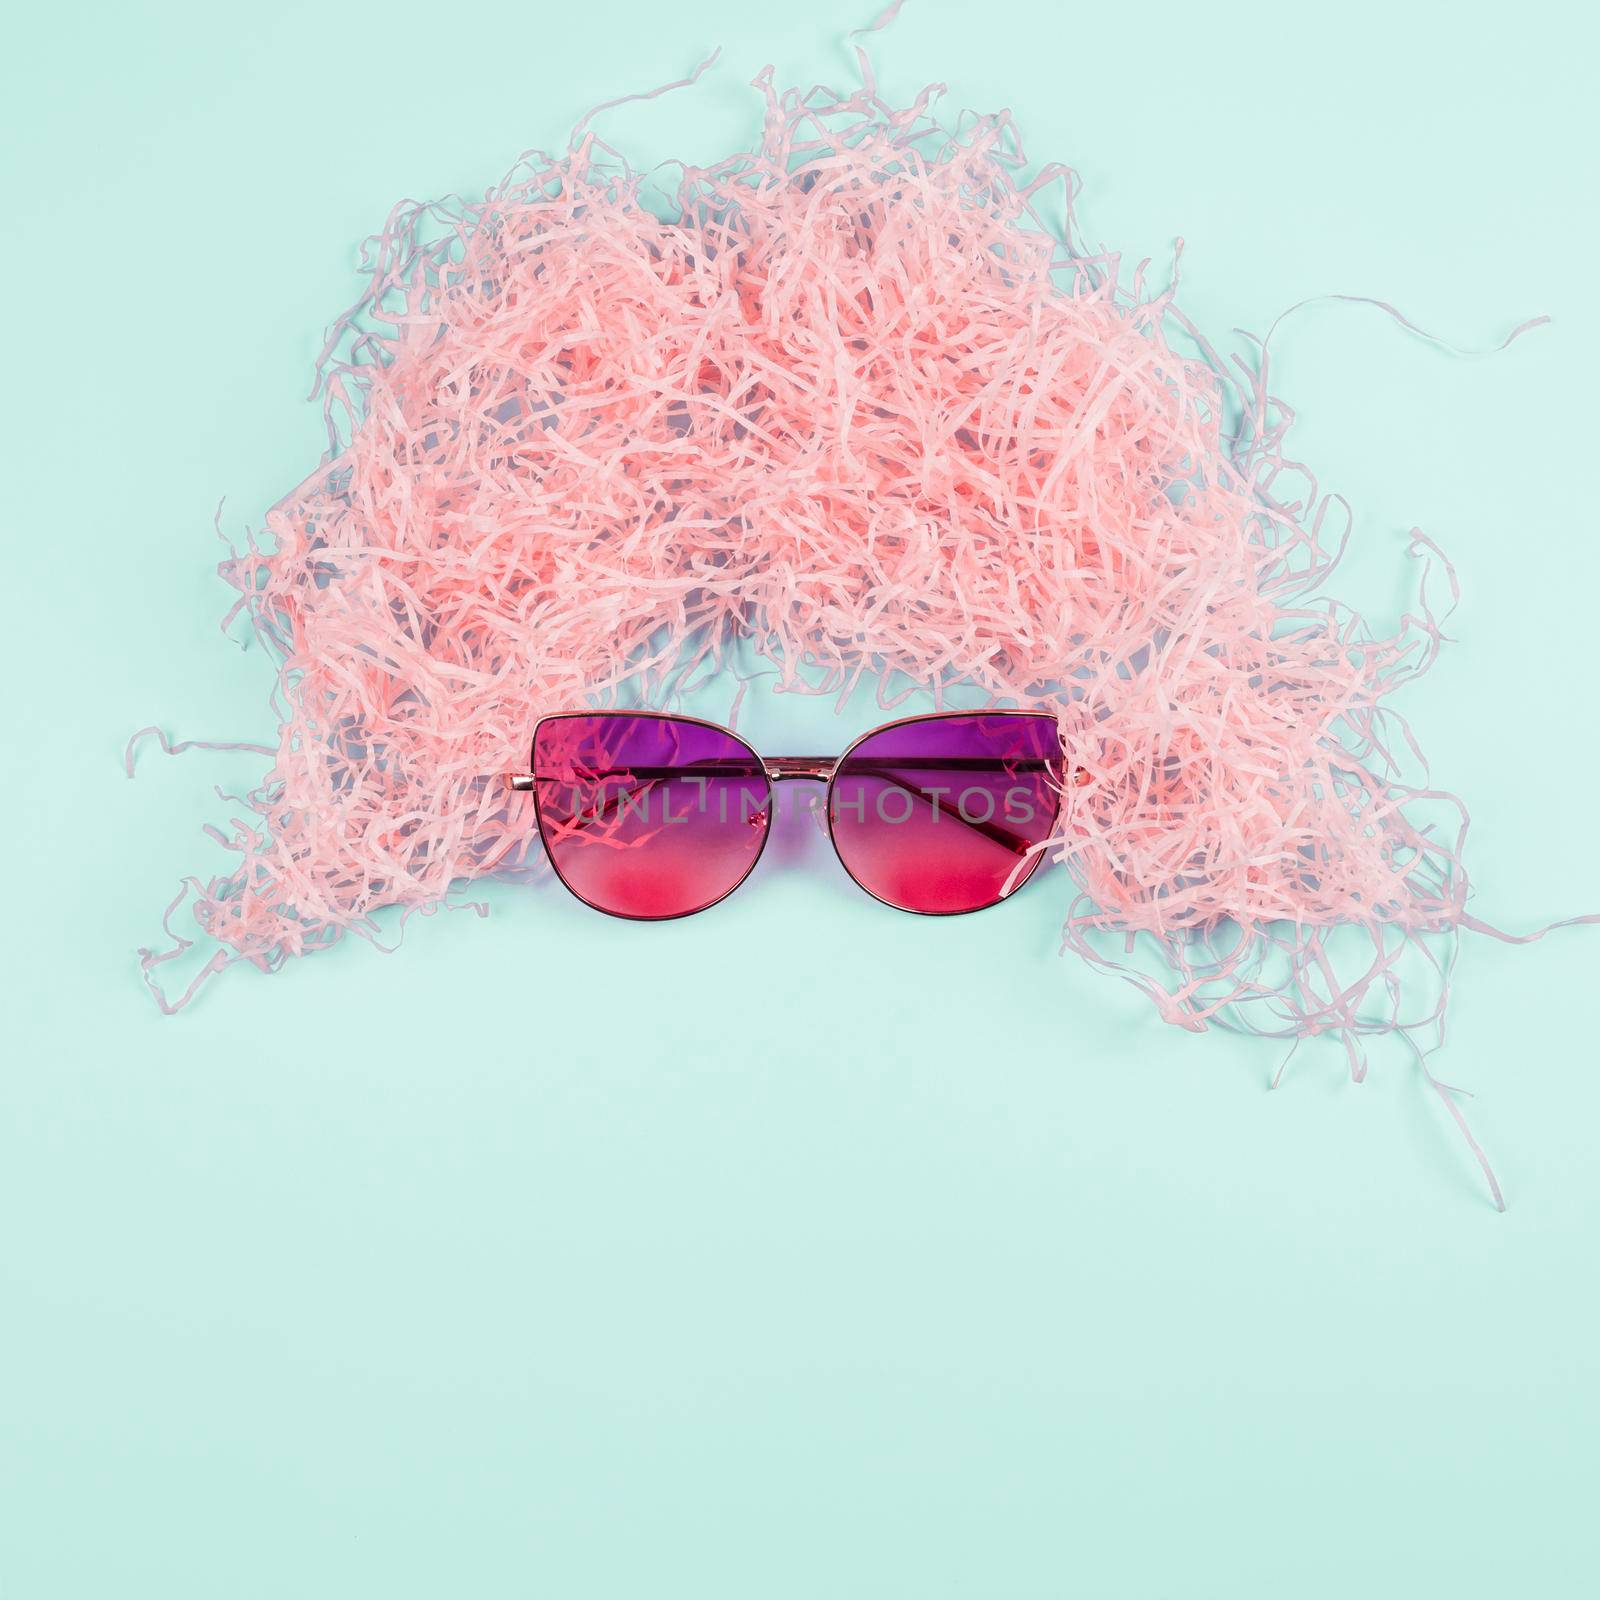 pink shredded paper wig sunglasses mint background. High resolution photo